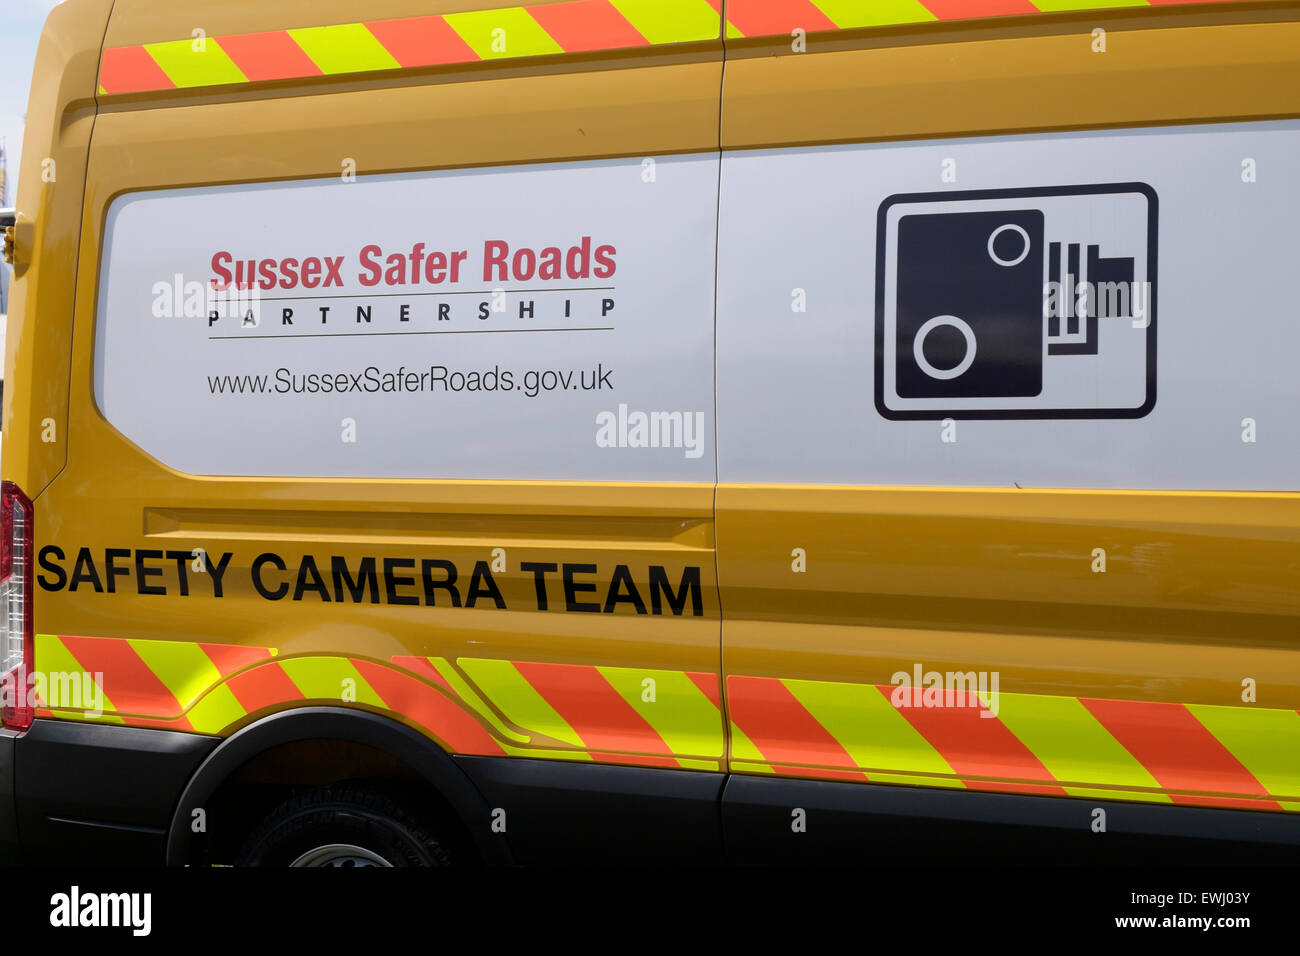 Sussex safer roads safety camera team van, used as a mobile speed camera trap around west sussex uk. Stock Photo